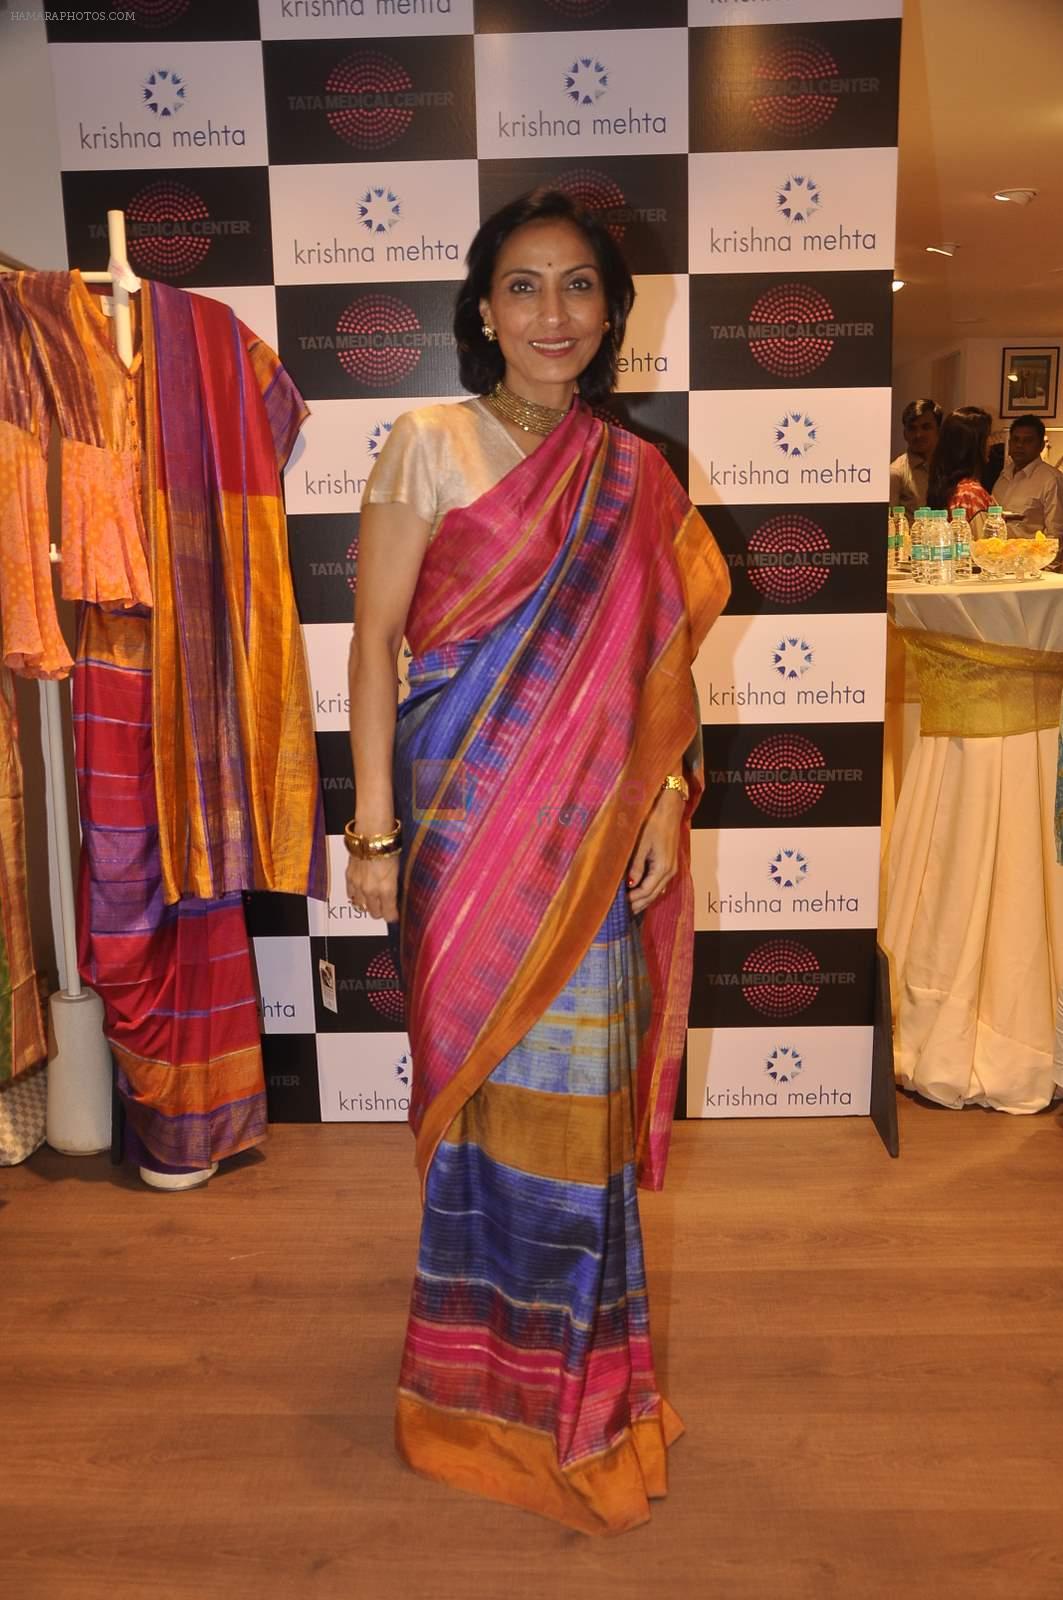 Krishna Mehta's store in association with Tata Medical Center in Chowpatty on 10th July 2015